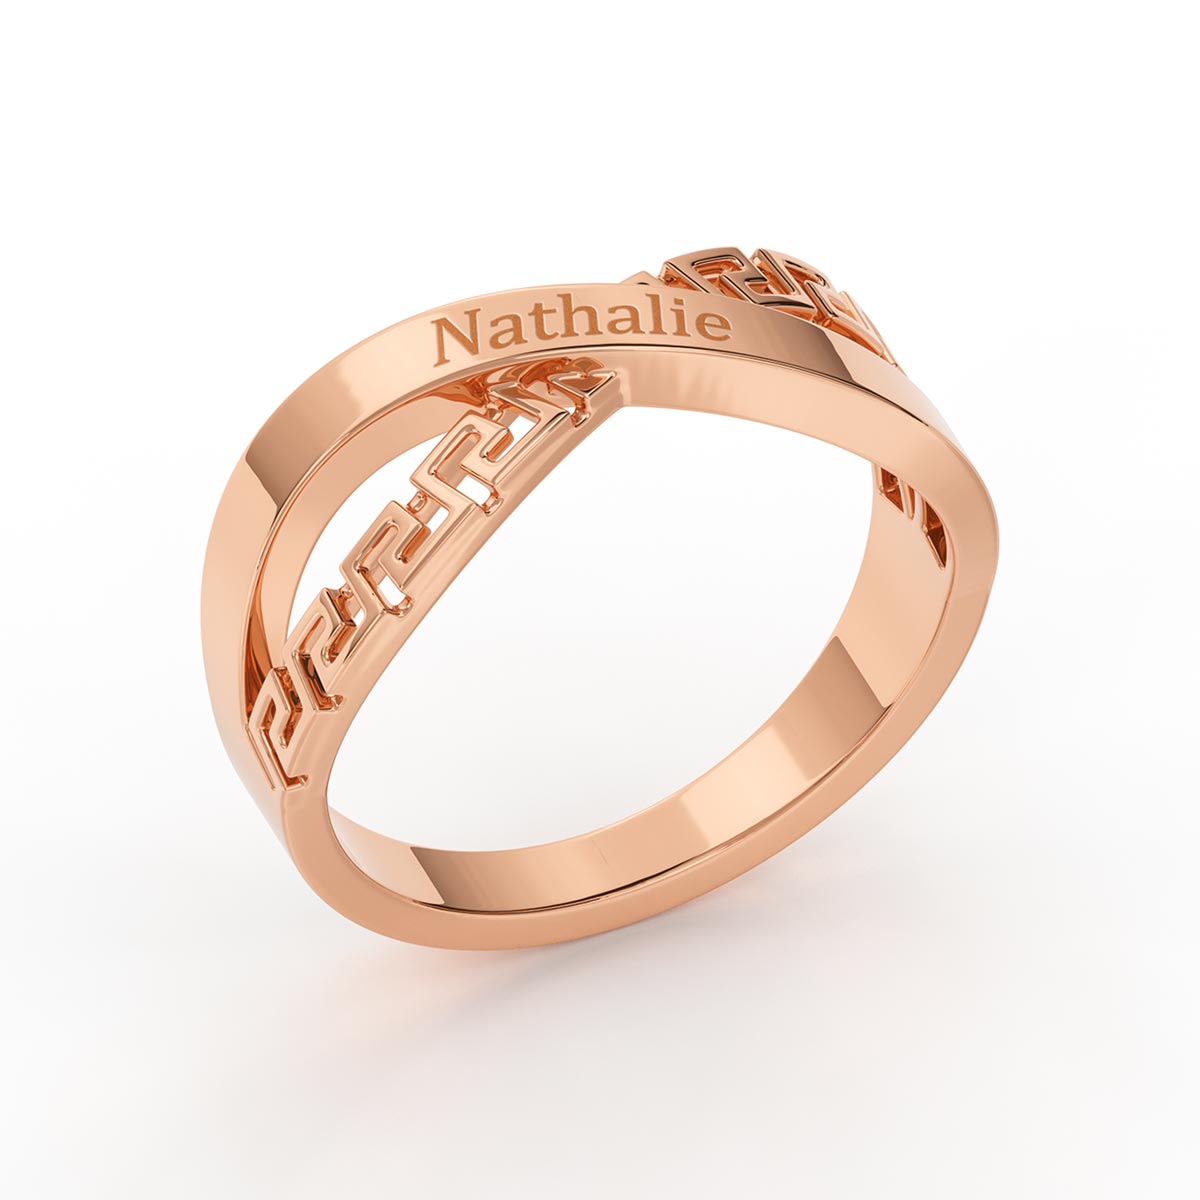 Personalized Greek Key Crossed Ring with Engraving